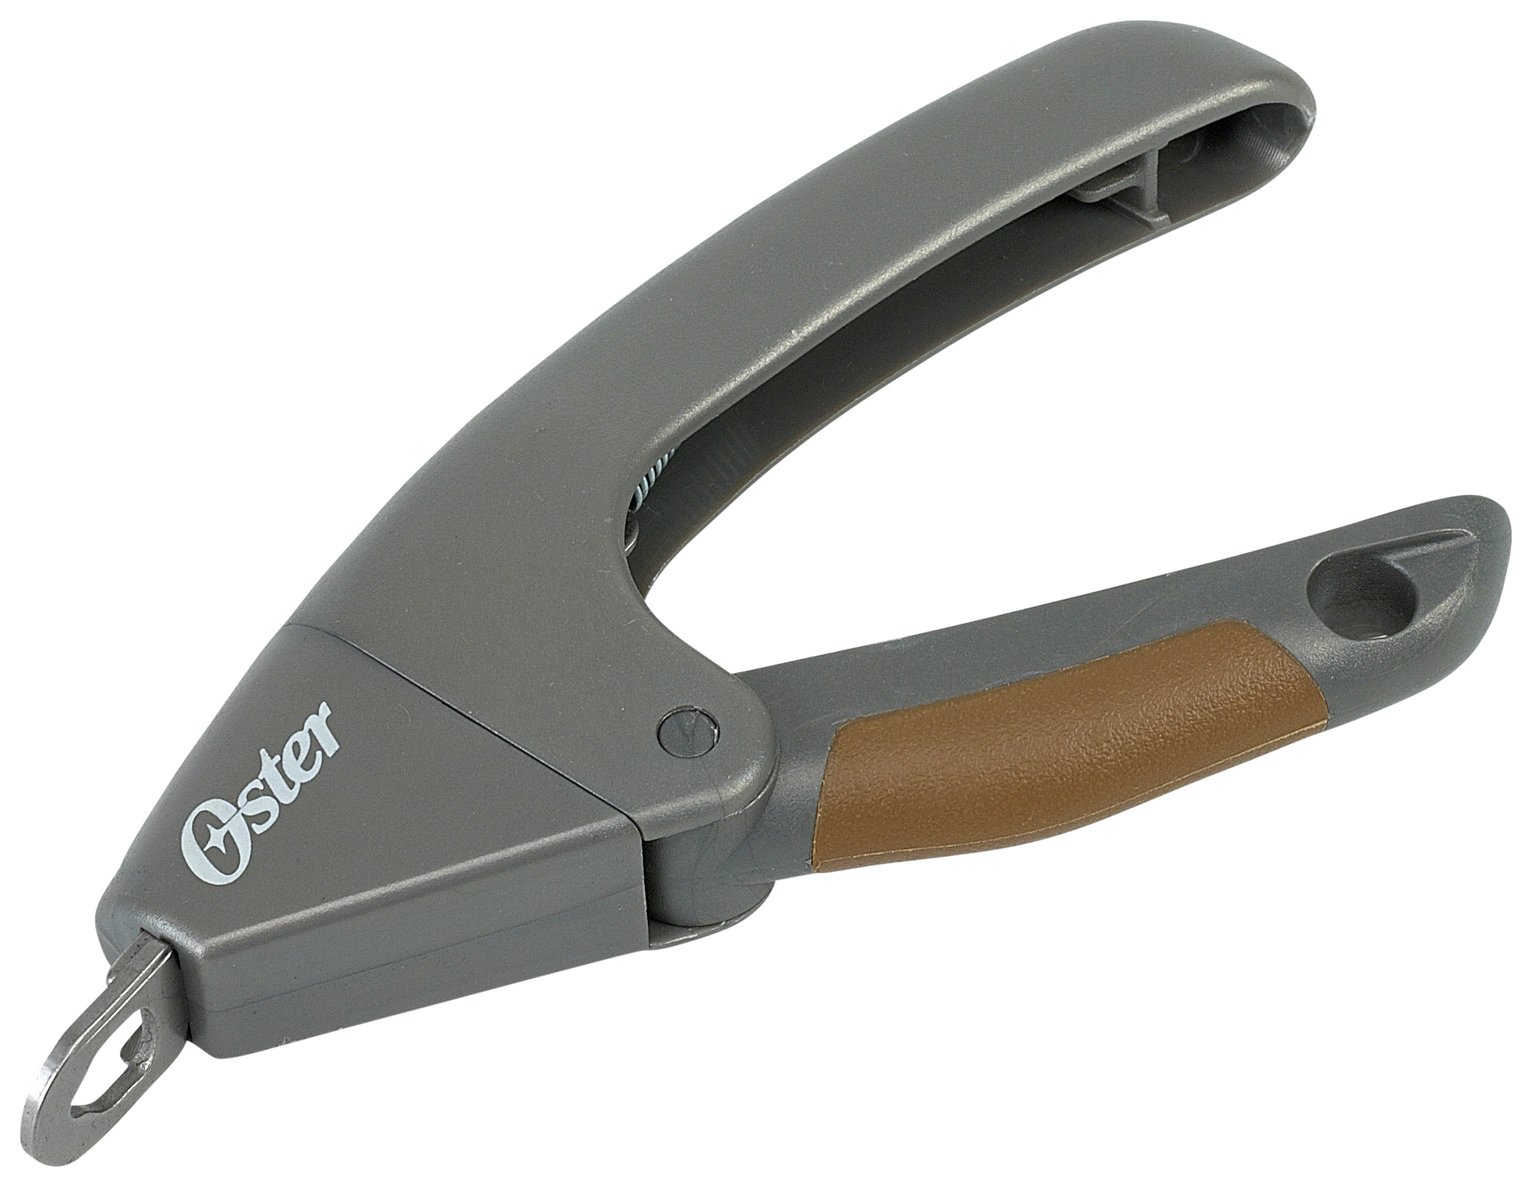 Oster Premium Guillotine Nail Trimmer